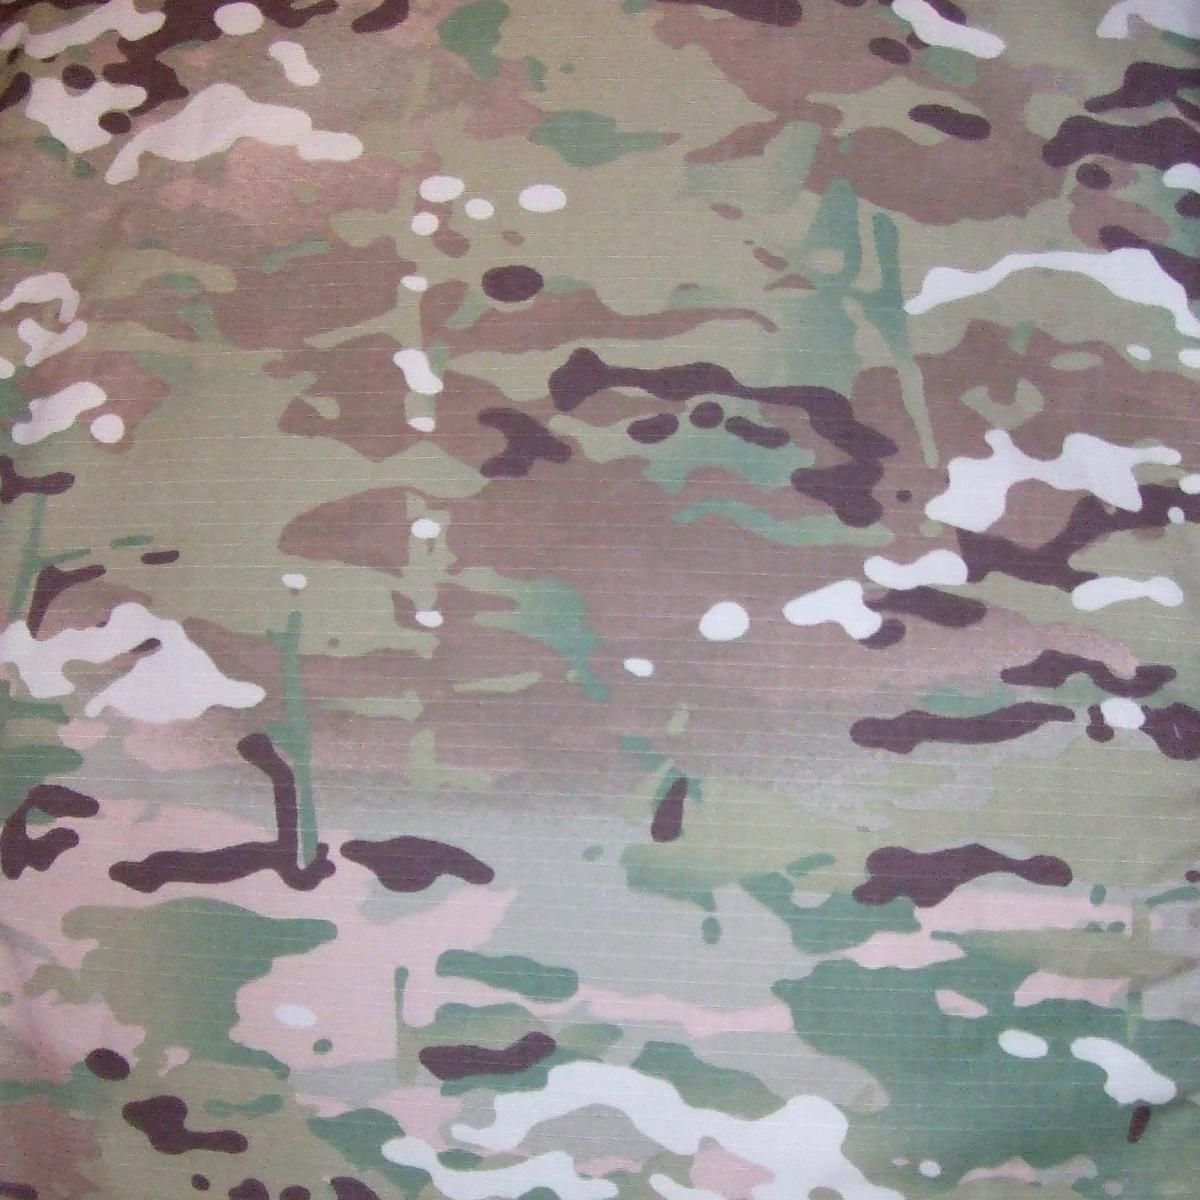 The Art and Science of Military Camouflage by Caitlin Hu (Works That Work magazine)